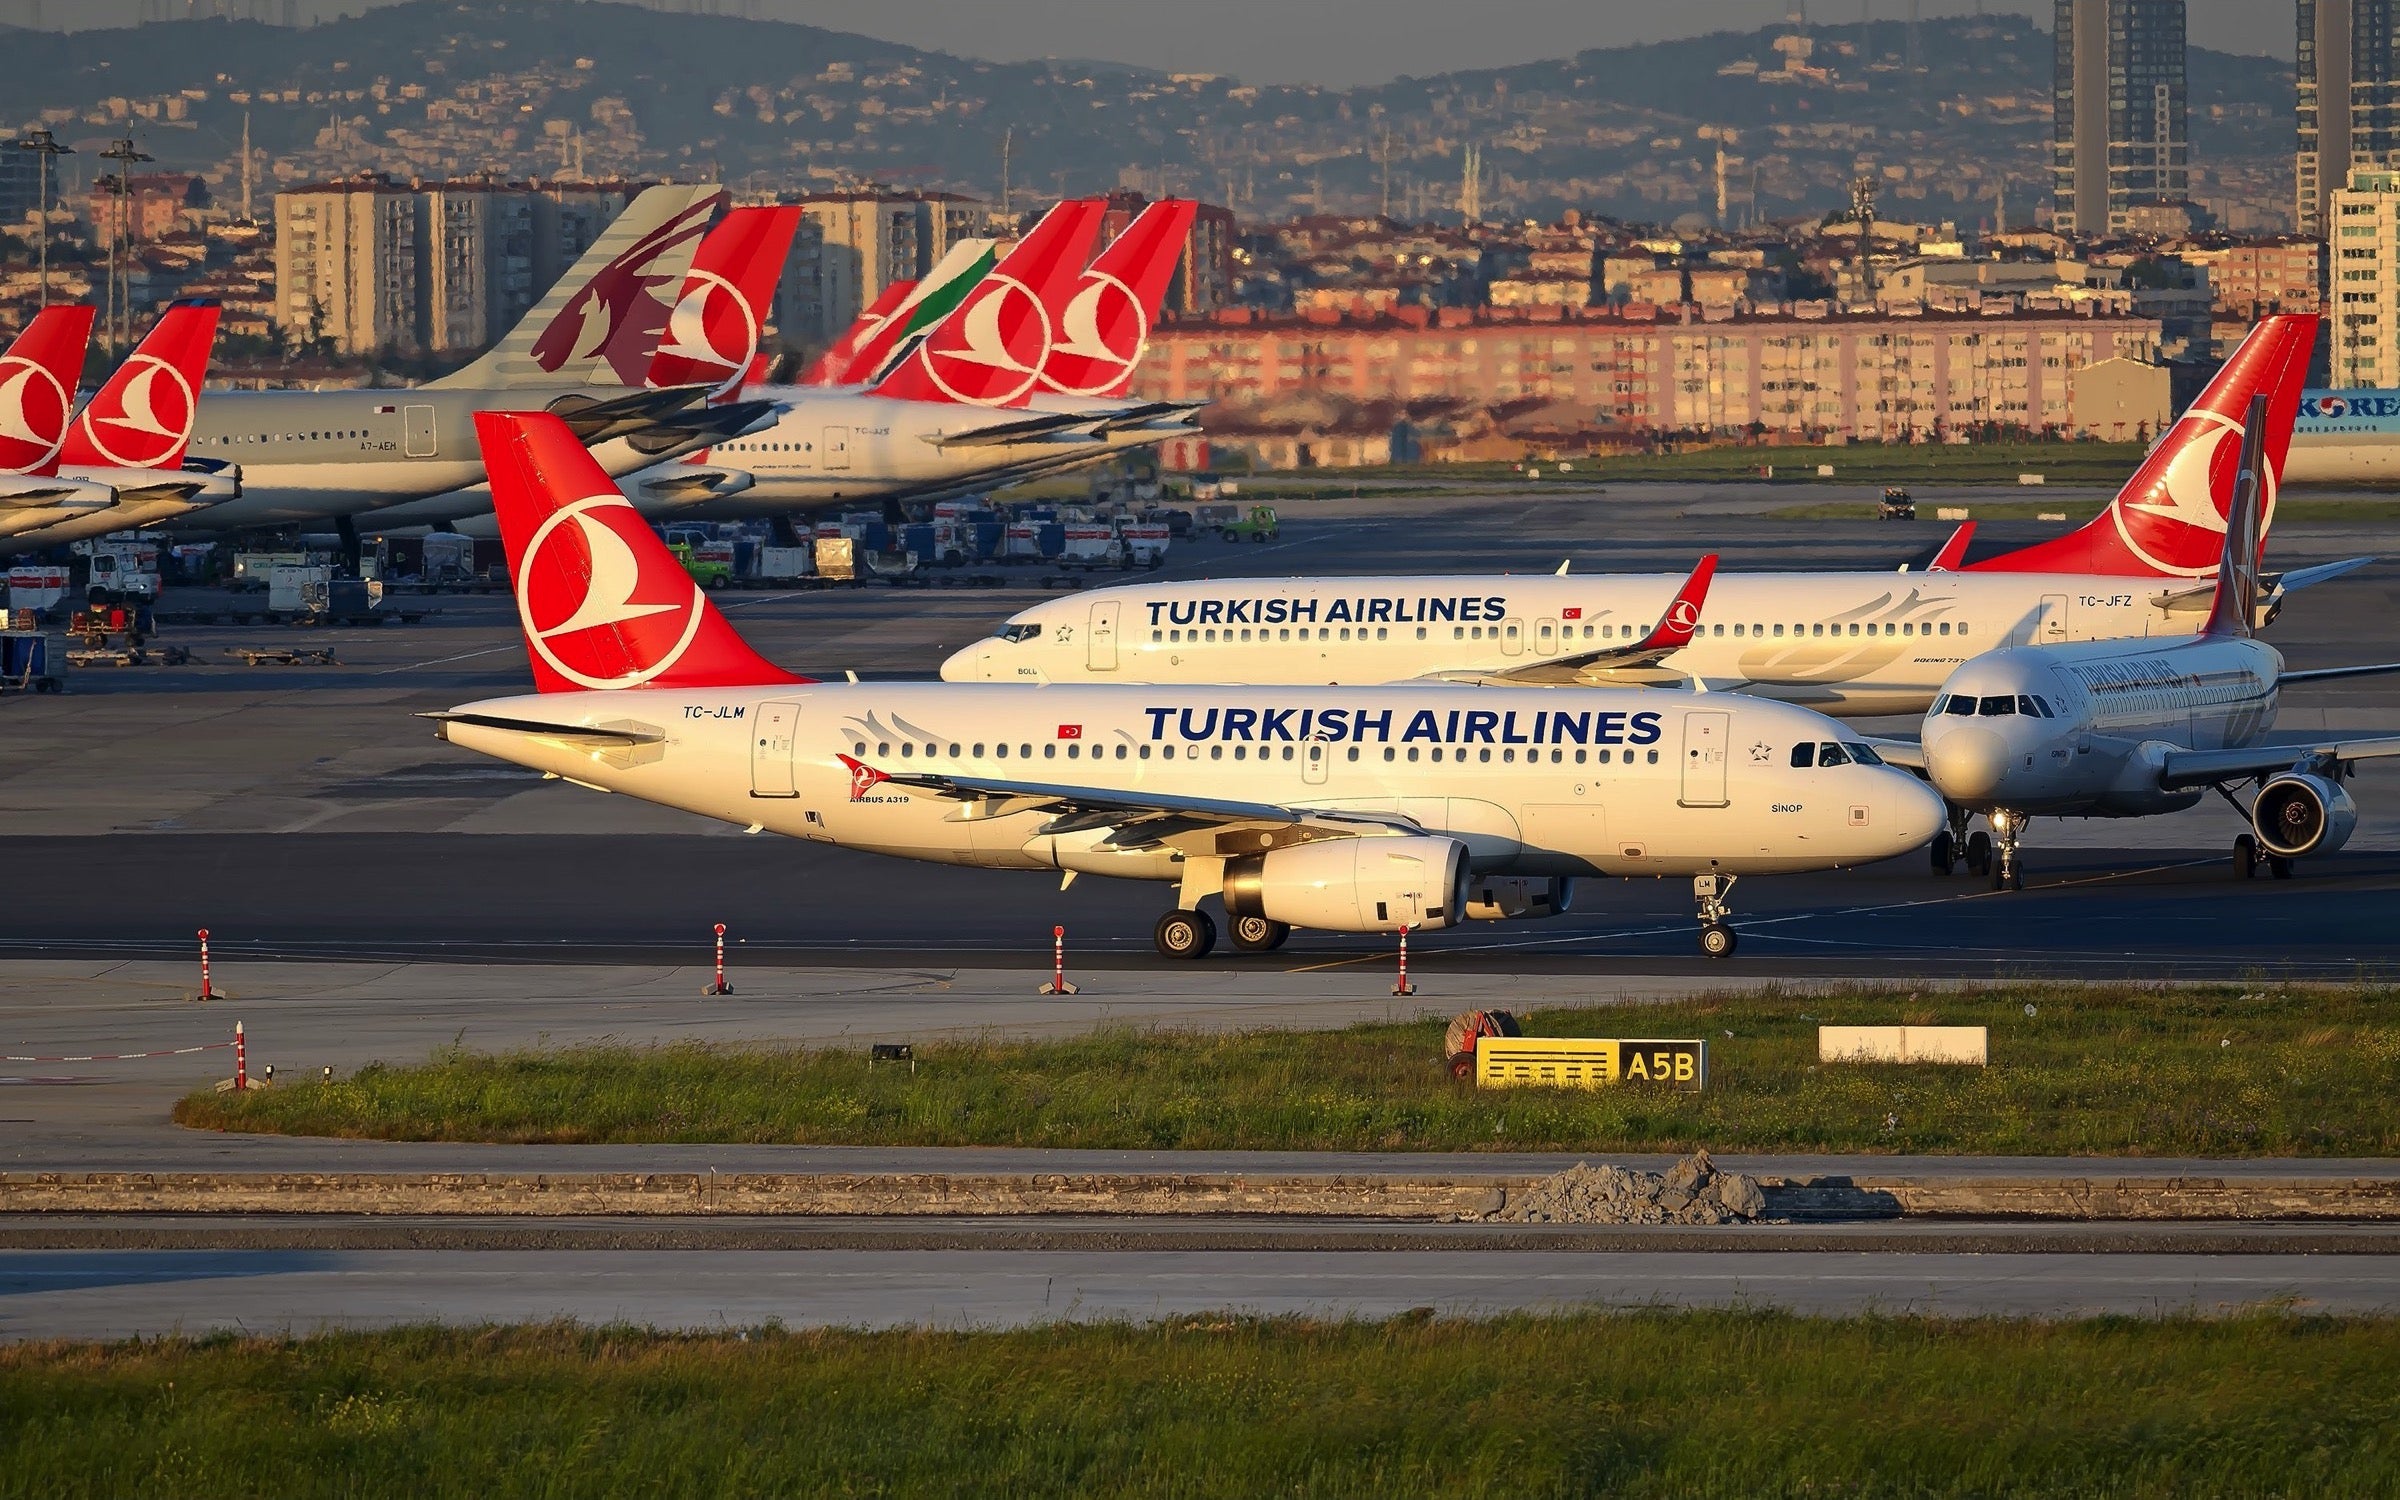 Turkish Airlines planes on the ground at IST airport